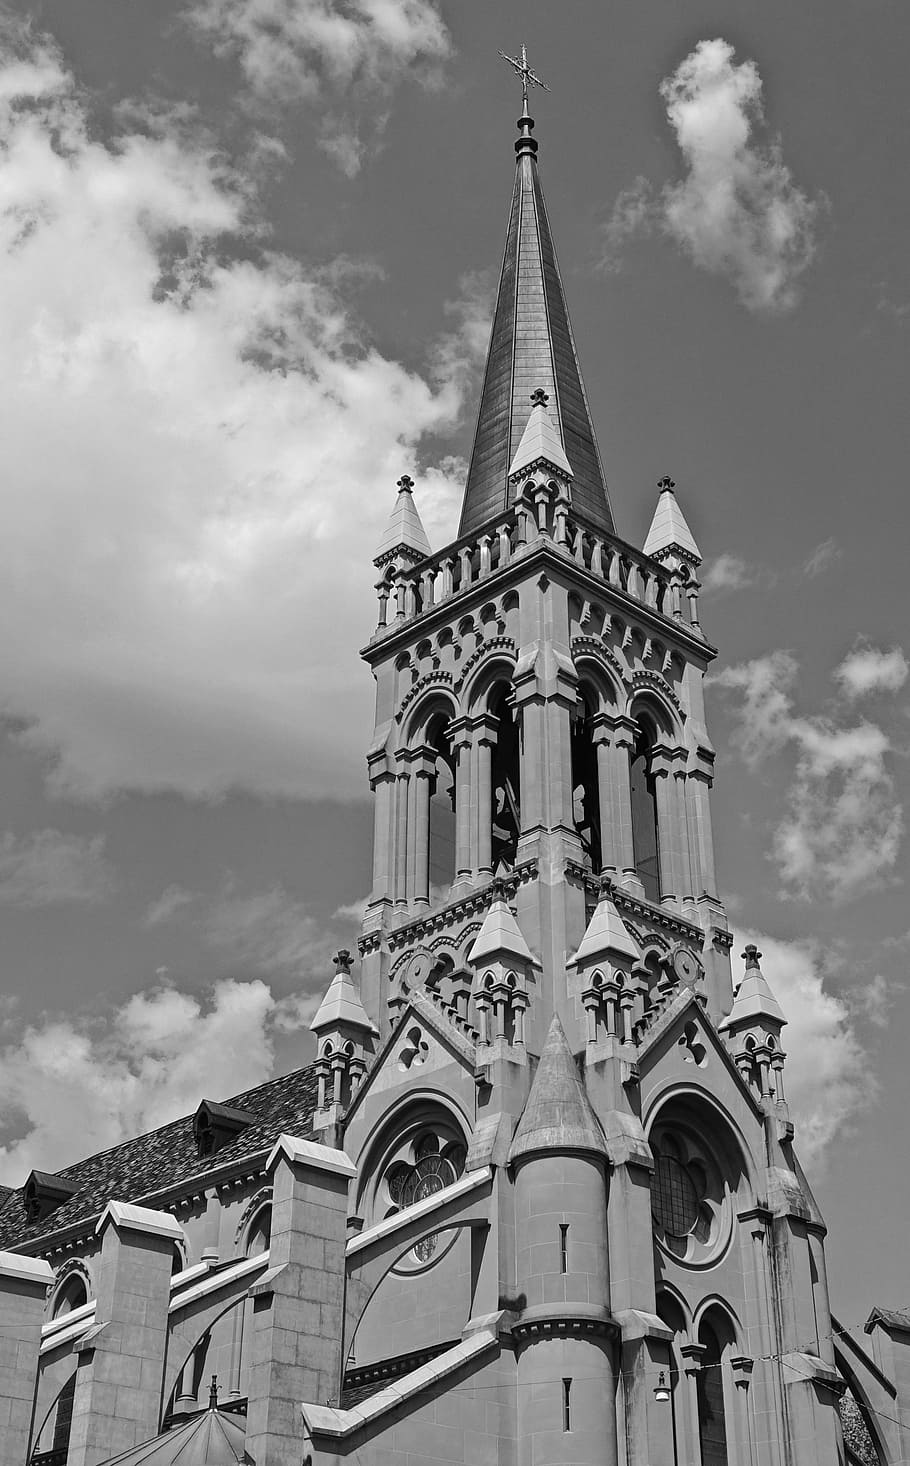 steeple, spire, church, cathedral, architecture, facade, ornate, belltower, nave, religion